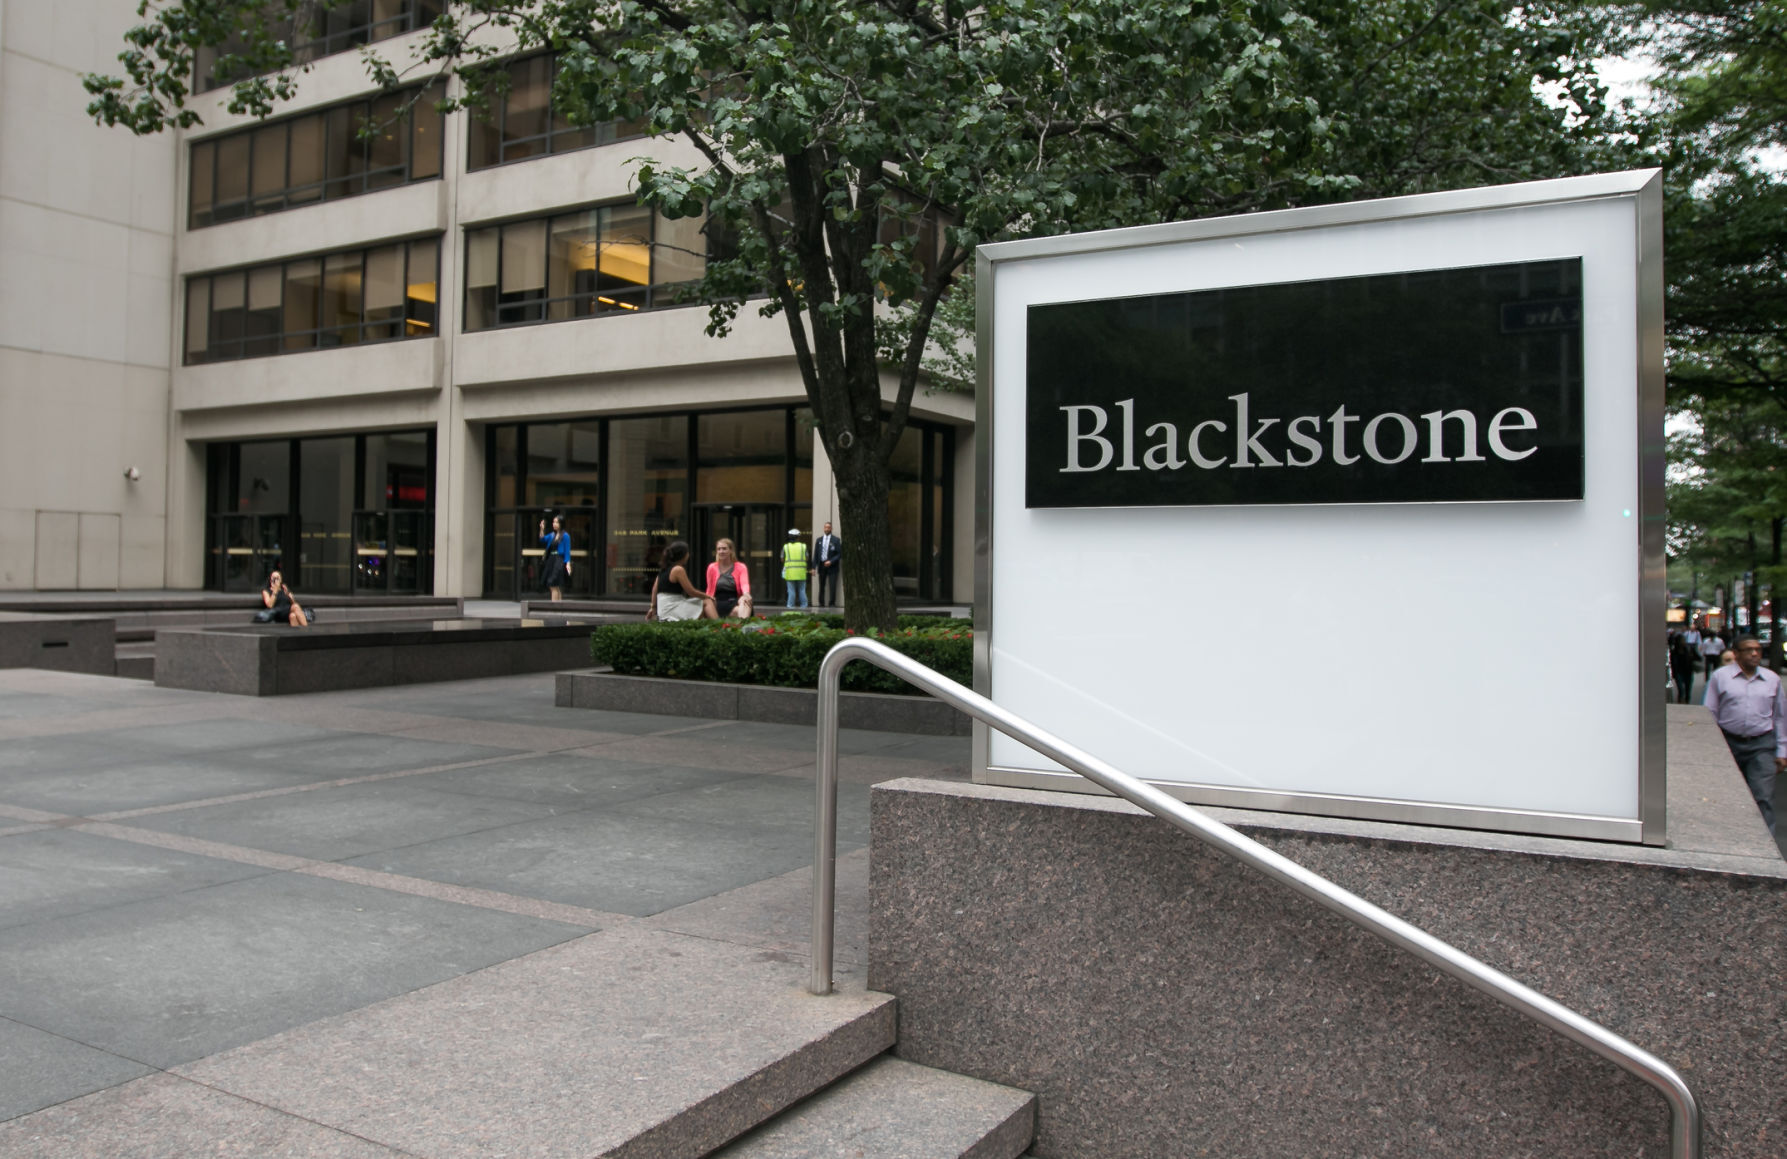 The largest U.S. manager of private equity funds, Blackstone Group is preparing to package and sell data from companies it acquires in future deals. PHOTO CREDIT: Tribune News Service